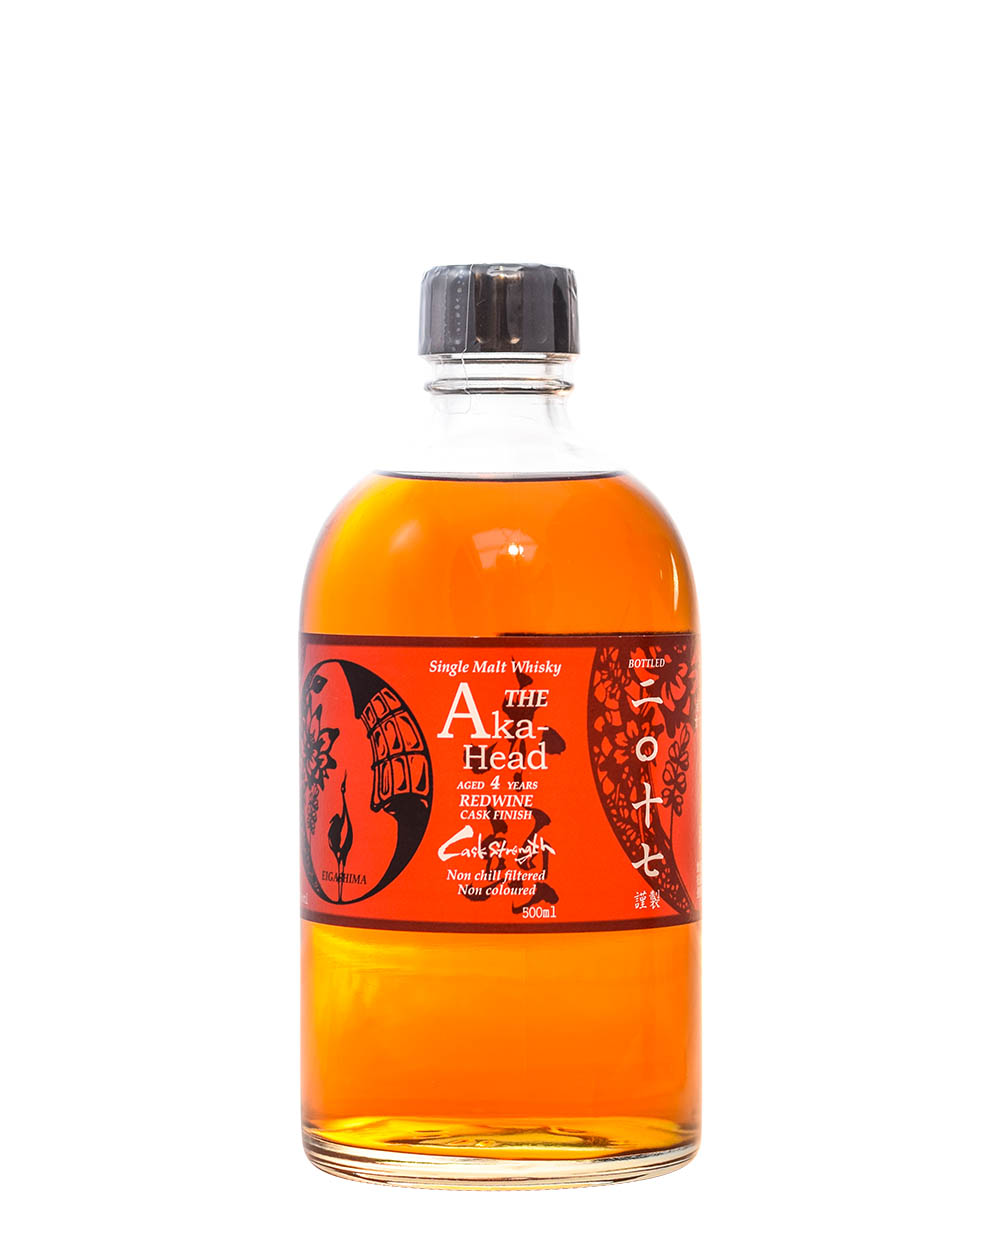 Eigashima The Aka-Head - Red Wine Cask Finish (4 years Old) Musthave Malts MHM